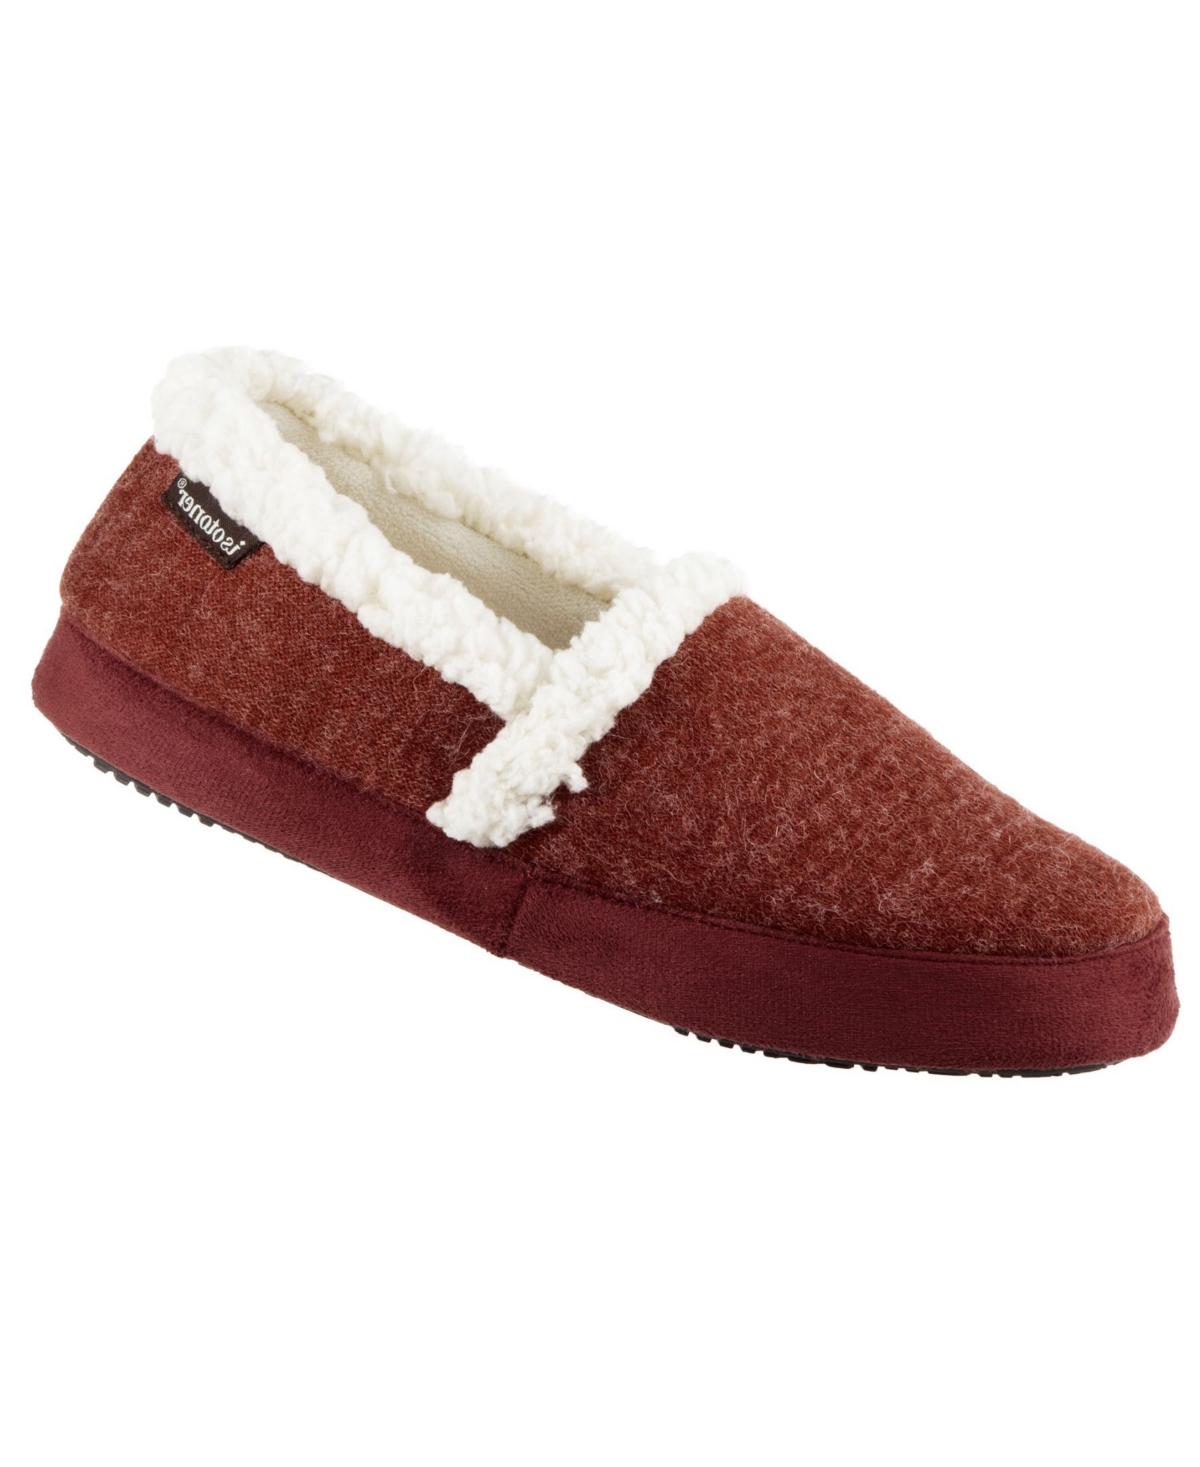 Women's Closed Back Slippers, Online Only - Chili